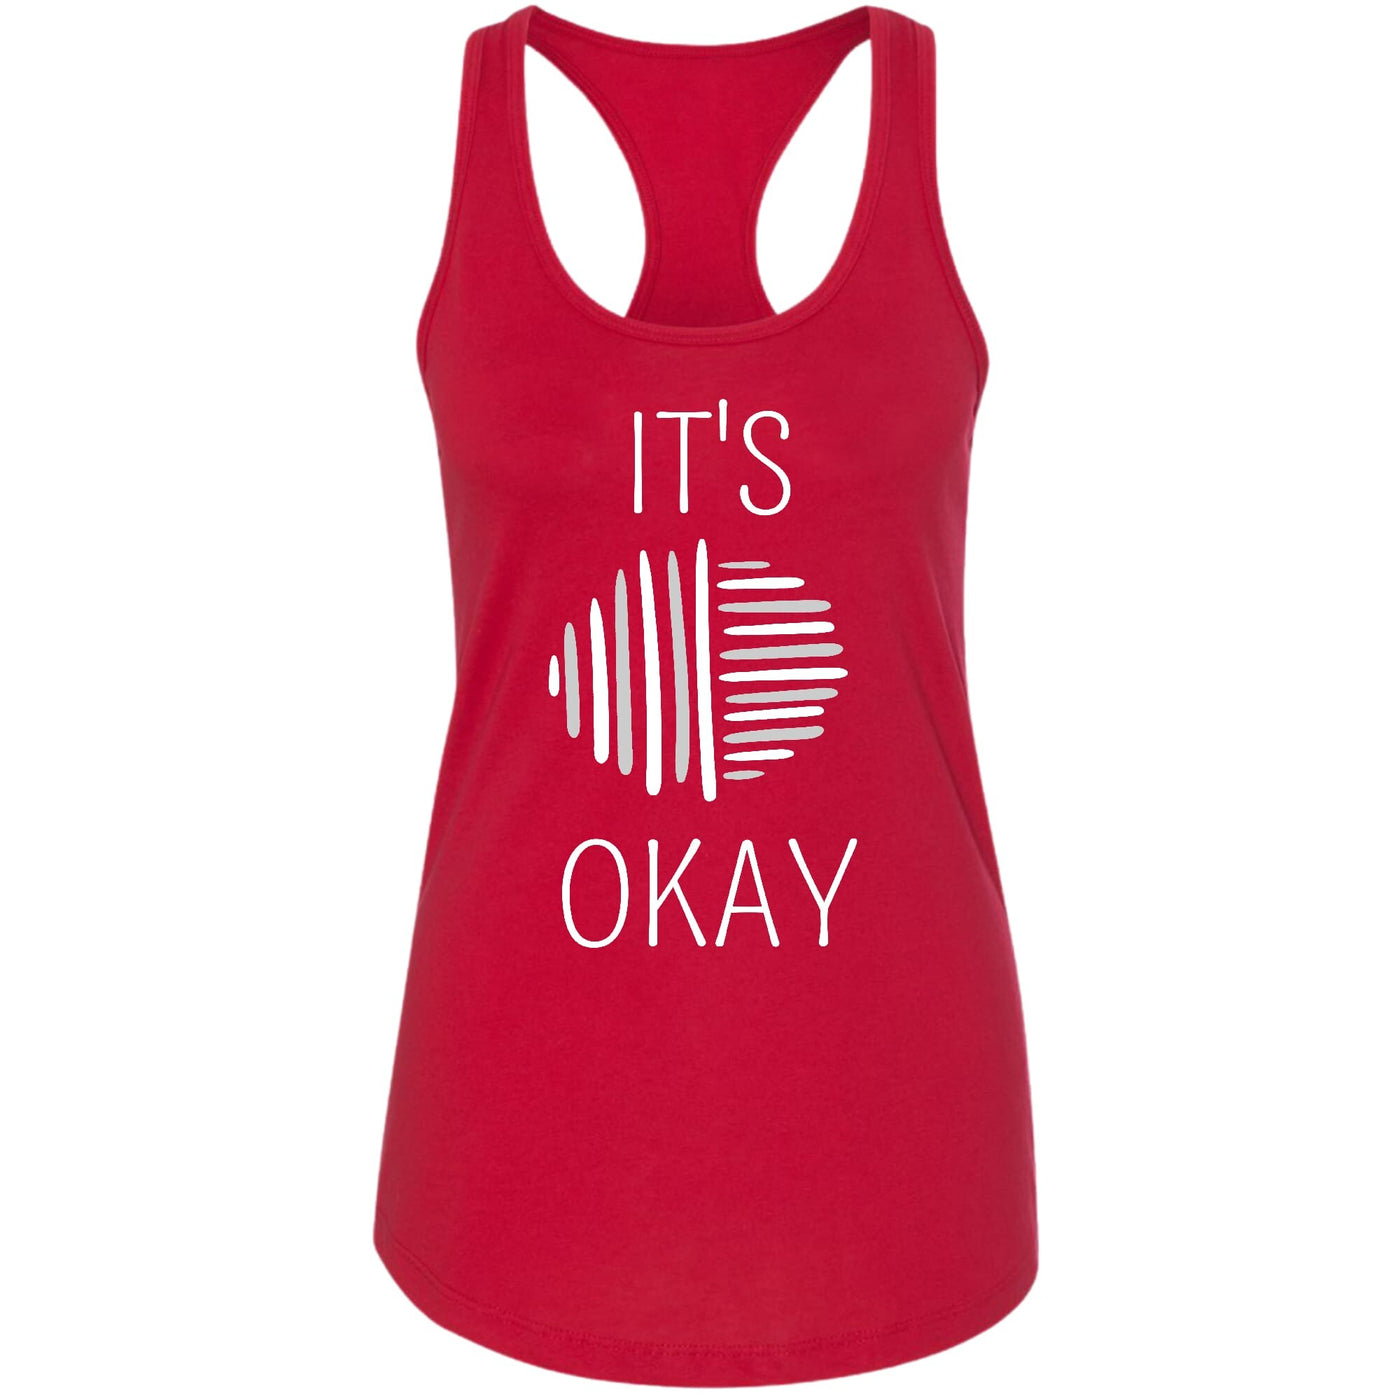 Womens Tank Top Fitness Shirt Say It Soul Its Okay Grey And White - Womens